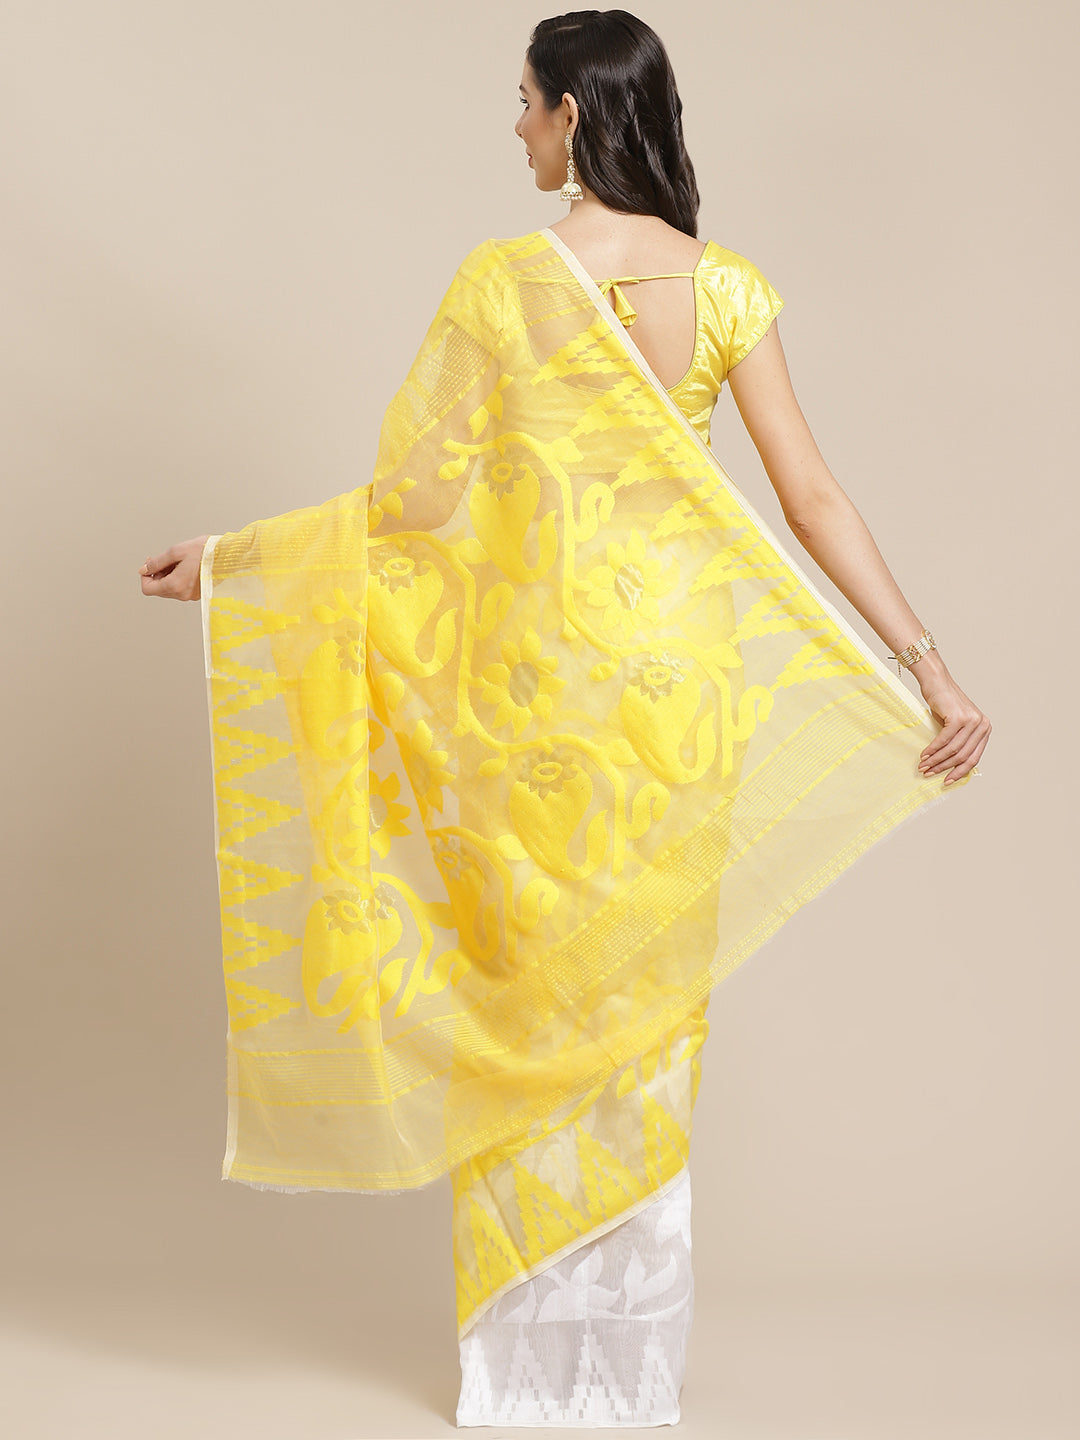 Yellow and Cream, Kalakari India Jamdani Silk Cotton Woven Design Saree without blouse CHBHSA0011-Saree-Kalakari India-CHBHSA0011-Bengal, Geographical Indication, Hand Crafted, Hand Painted, Heritage Prints, Jamdani, Natural Dyes, Red, Sarees, Silk Blended, Sustainable Fabrics, Woven, Yellow-[Linen,Ethnic,wear,Fashionista,Handloom,Handicraft,Indigo,blockprint,block,print,Cotton,Chanderi,Blue, latest,classy,party,bollywood,trendy,summer,style,traditional,formal,elegant,unique,style,hand,block,pri